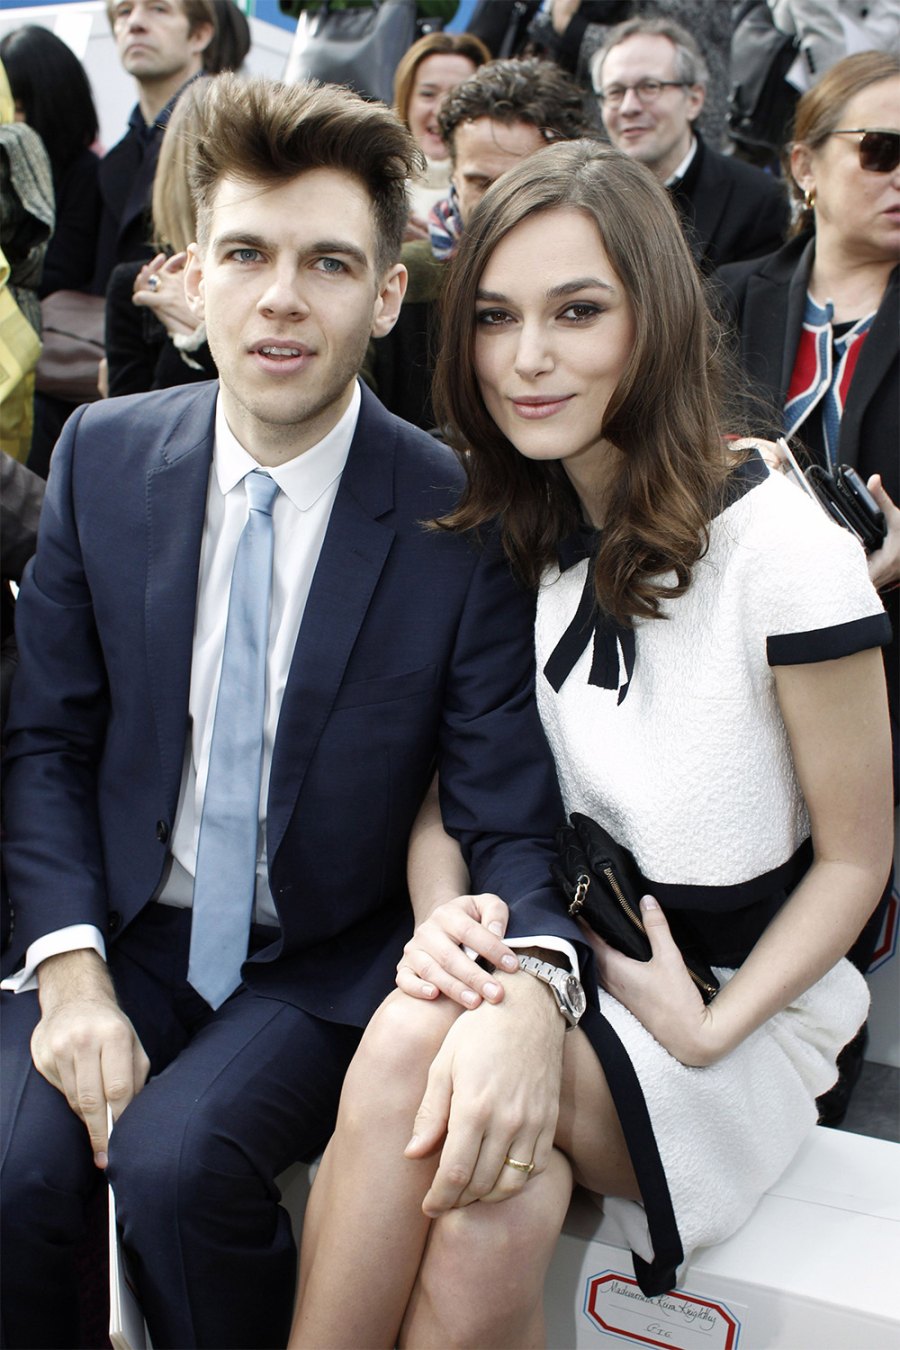 Keira Knightley and Husband James Righton's Relationship Timeline